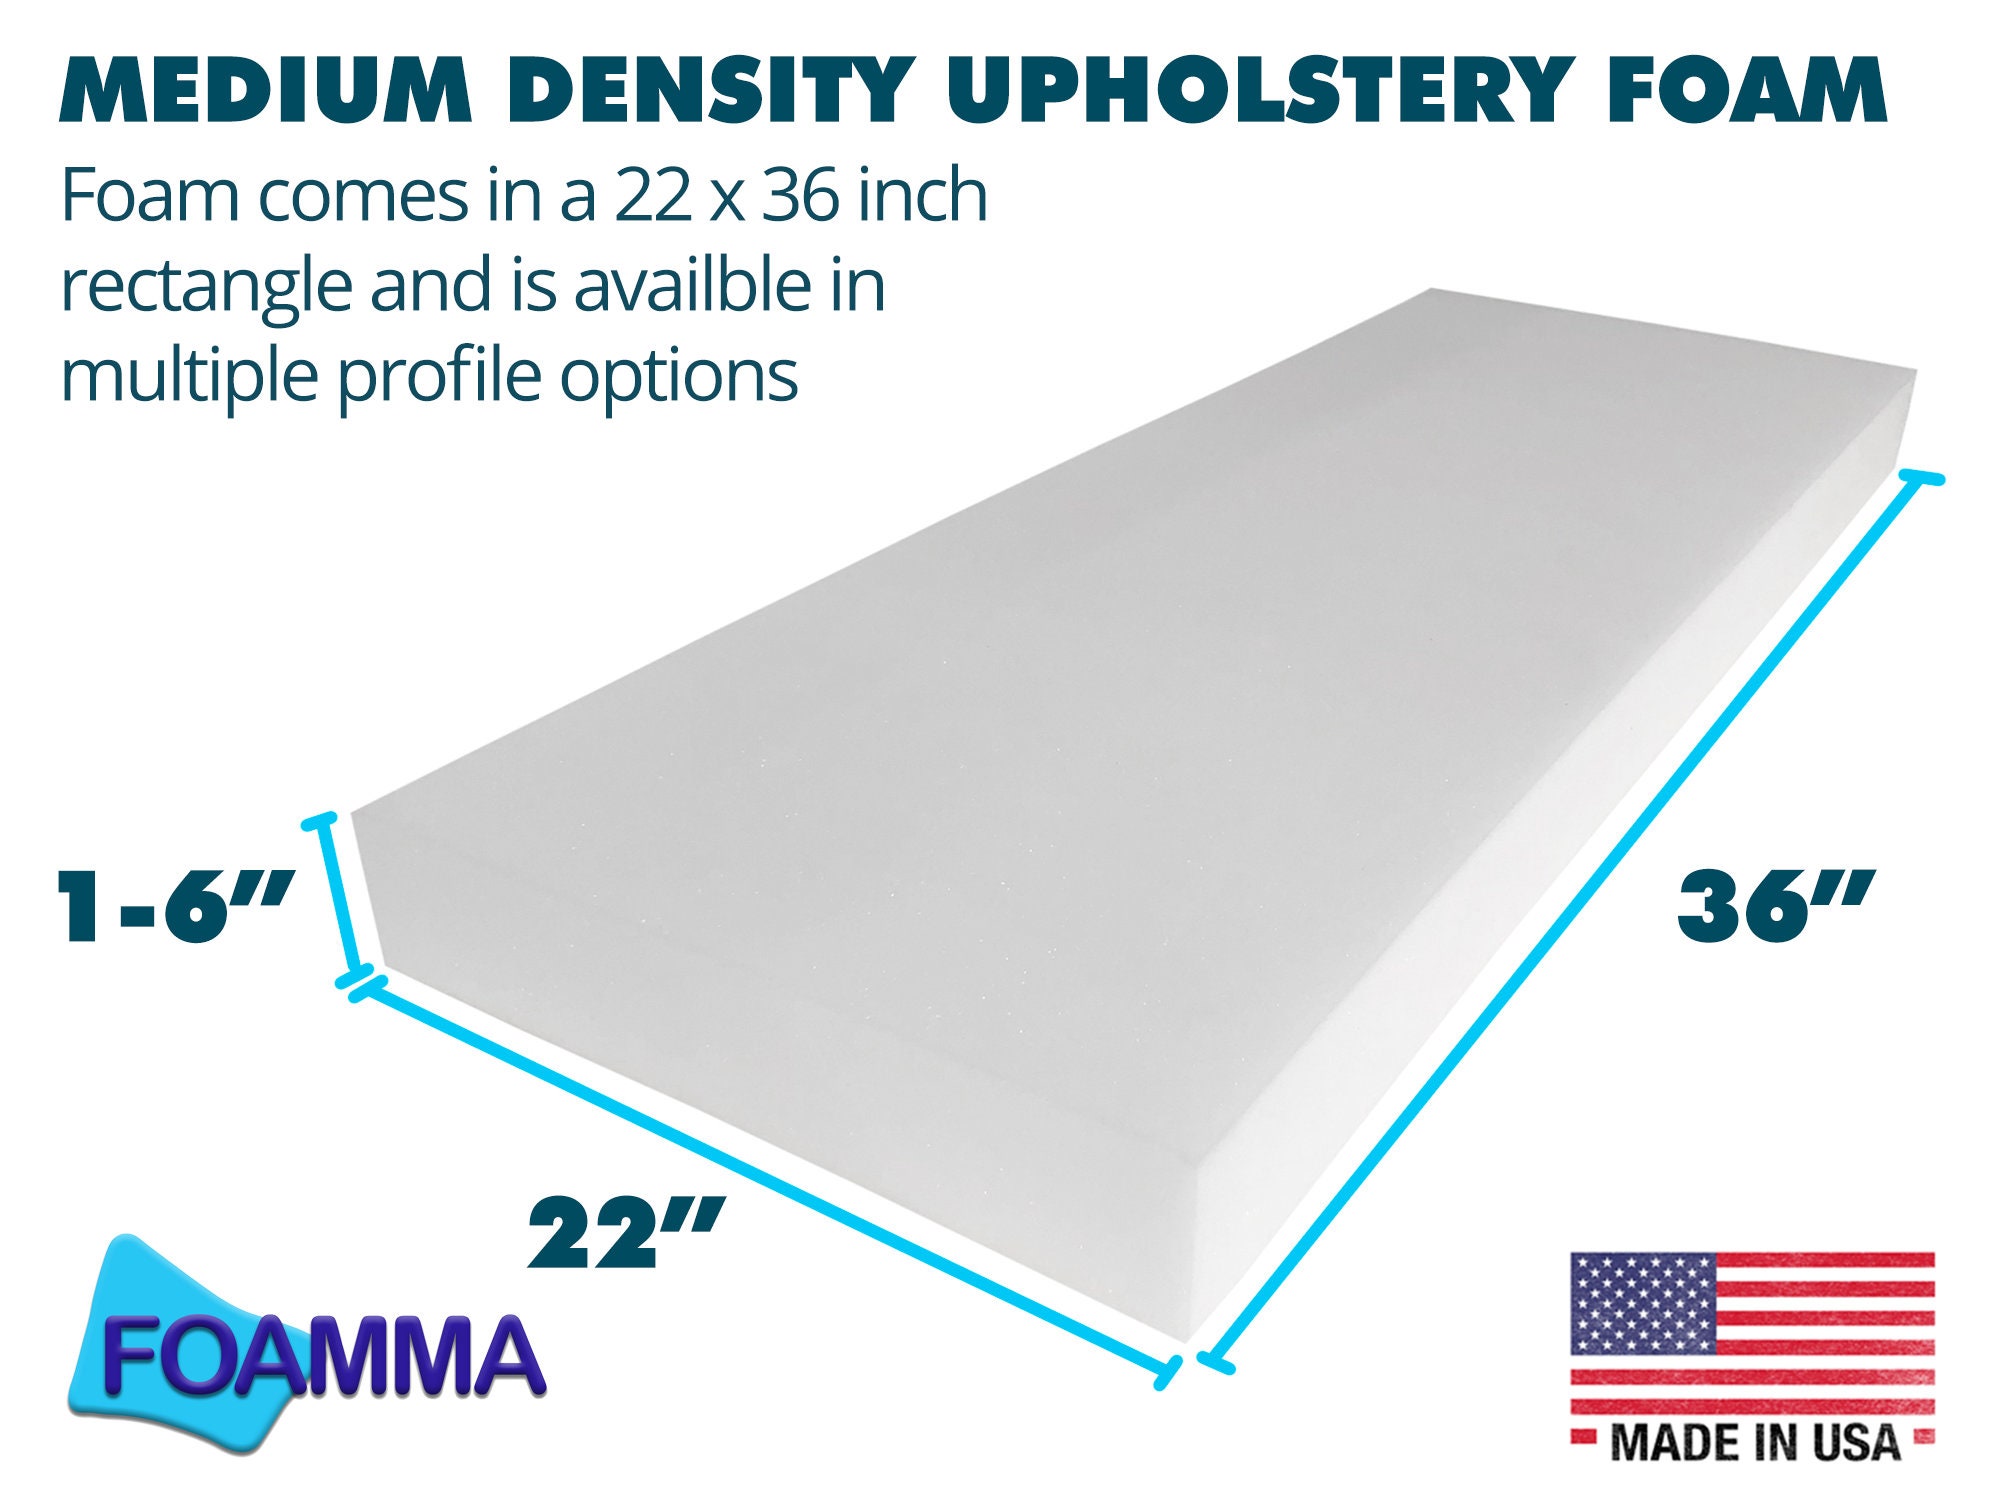 Foamma 2 x 22 x 22 High Density Upholstery Foam Padding, Thick-Custom Pillow, Chair, and Couch Cushion Replacement Foam, Craft Foam Upholstery